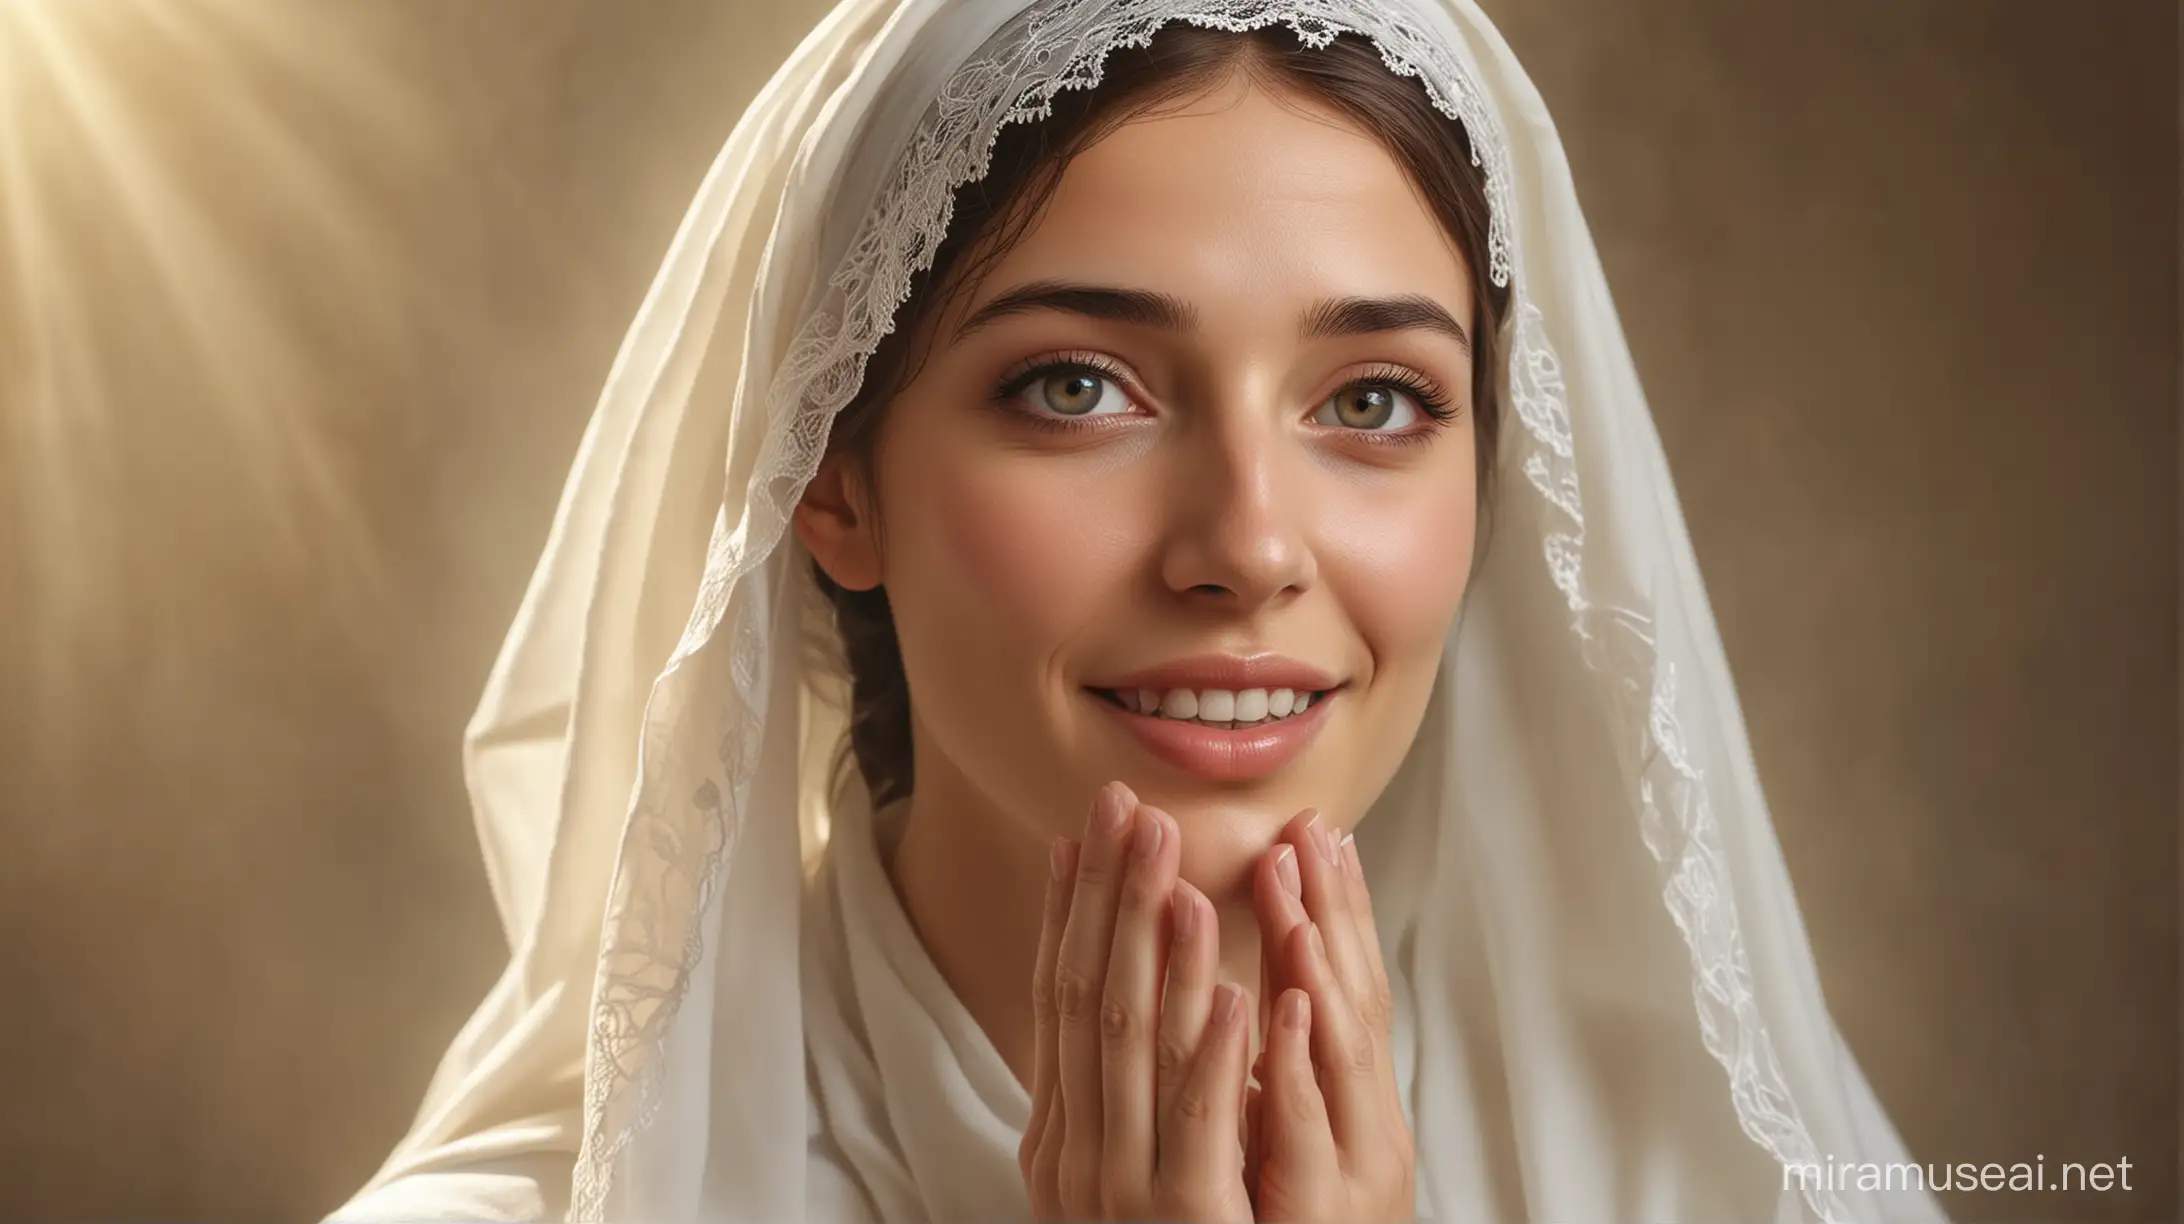 Youthful Mary in Historic Garb with Angelic Elegance in PreChrist Jerusalem